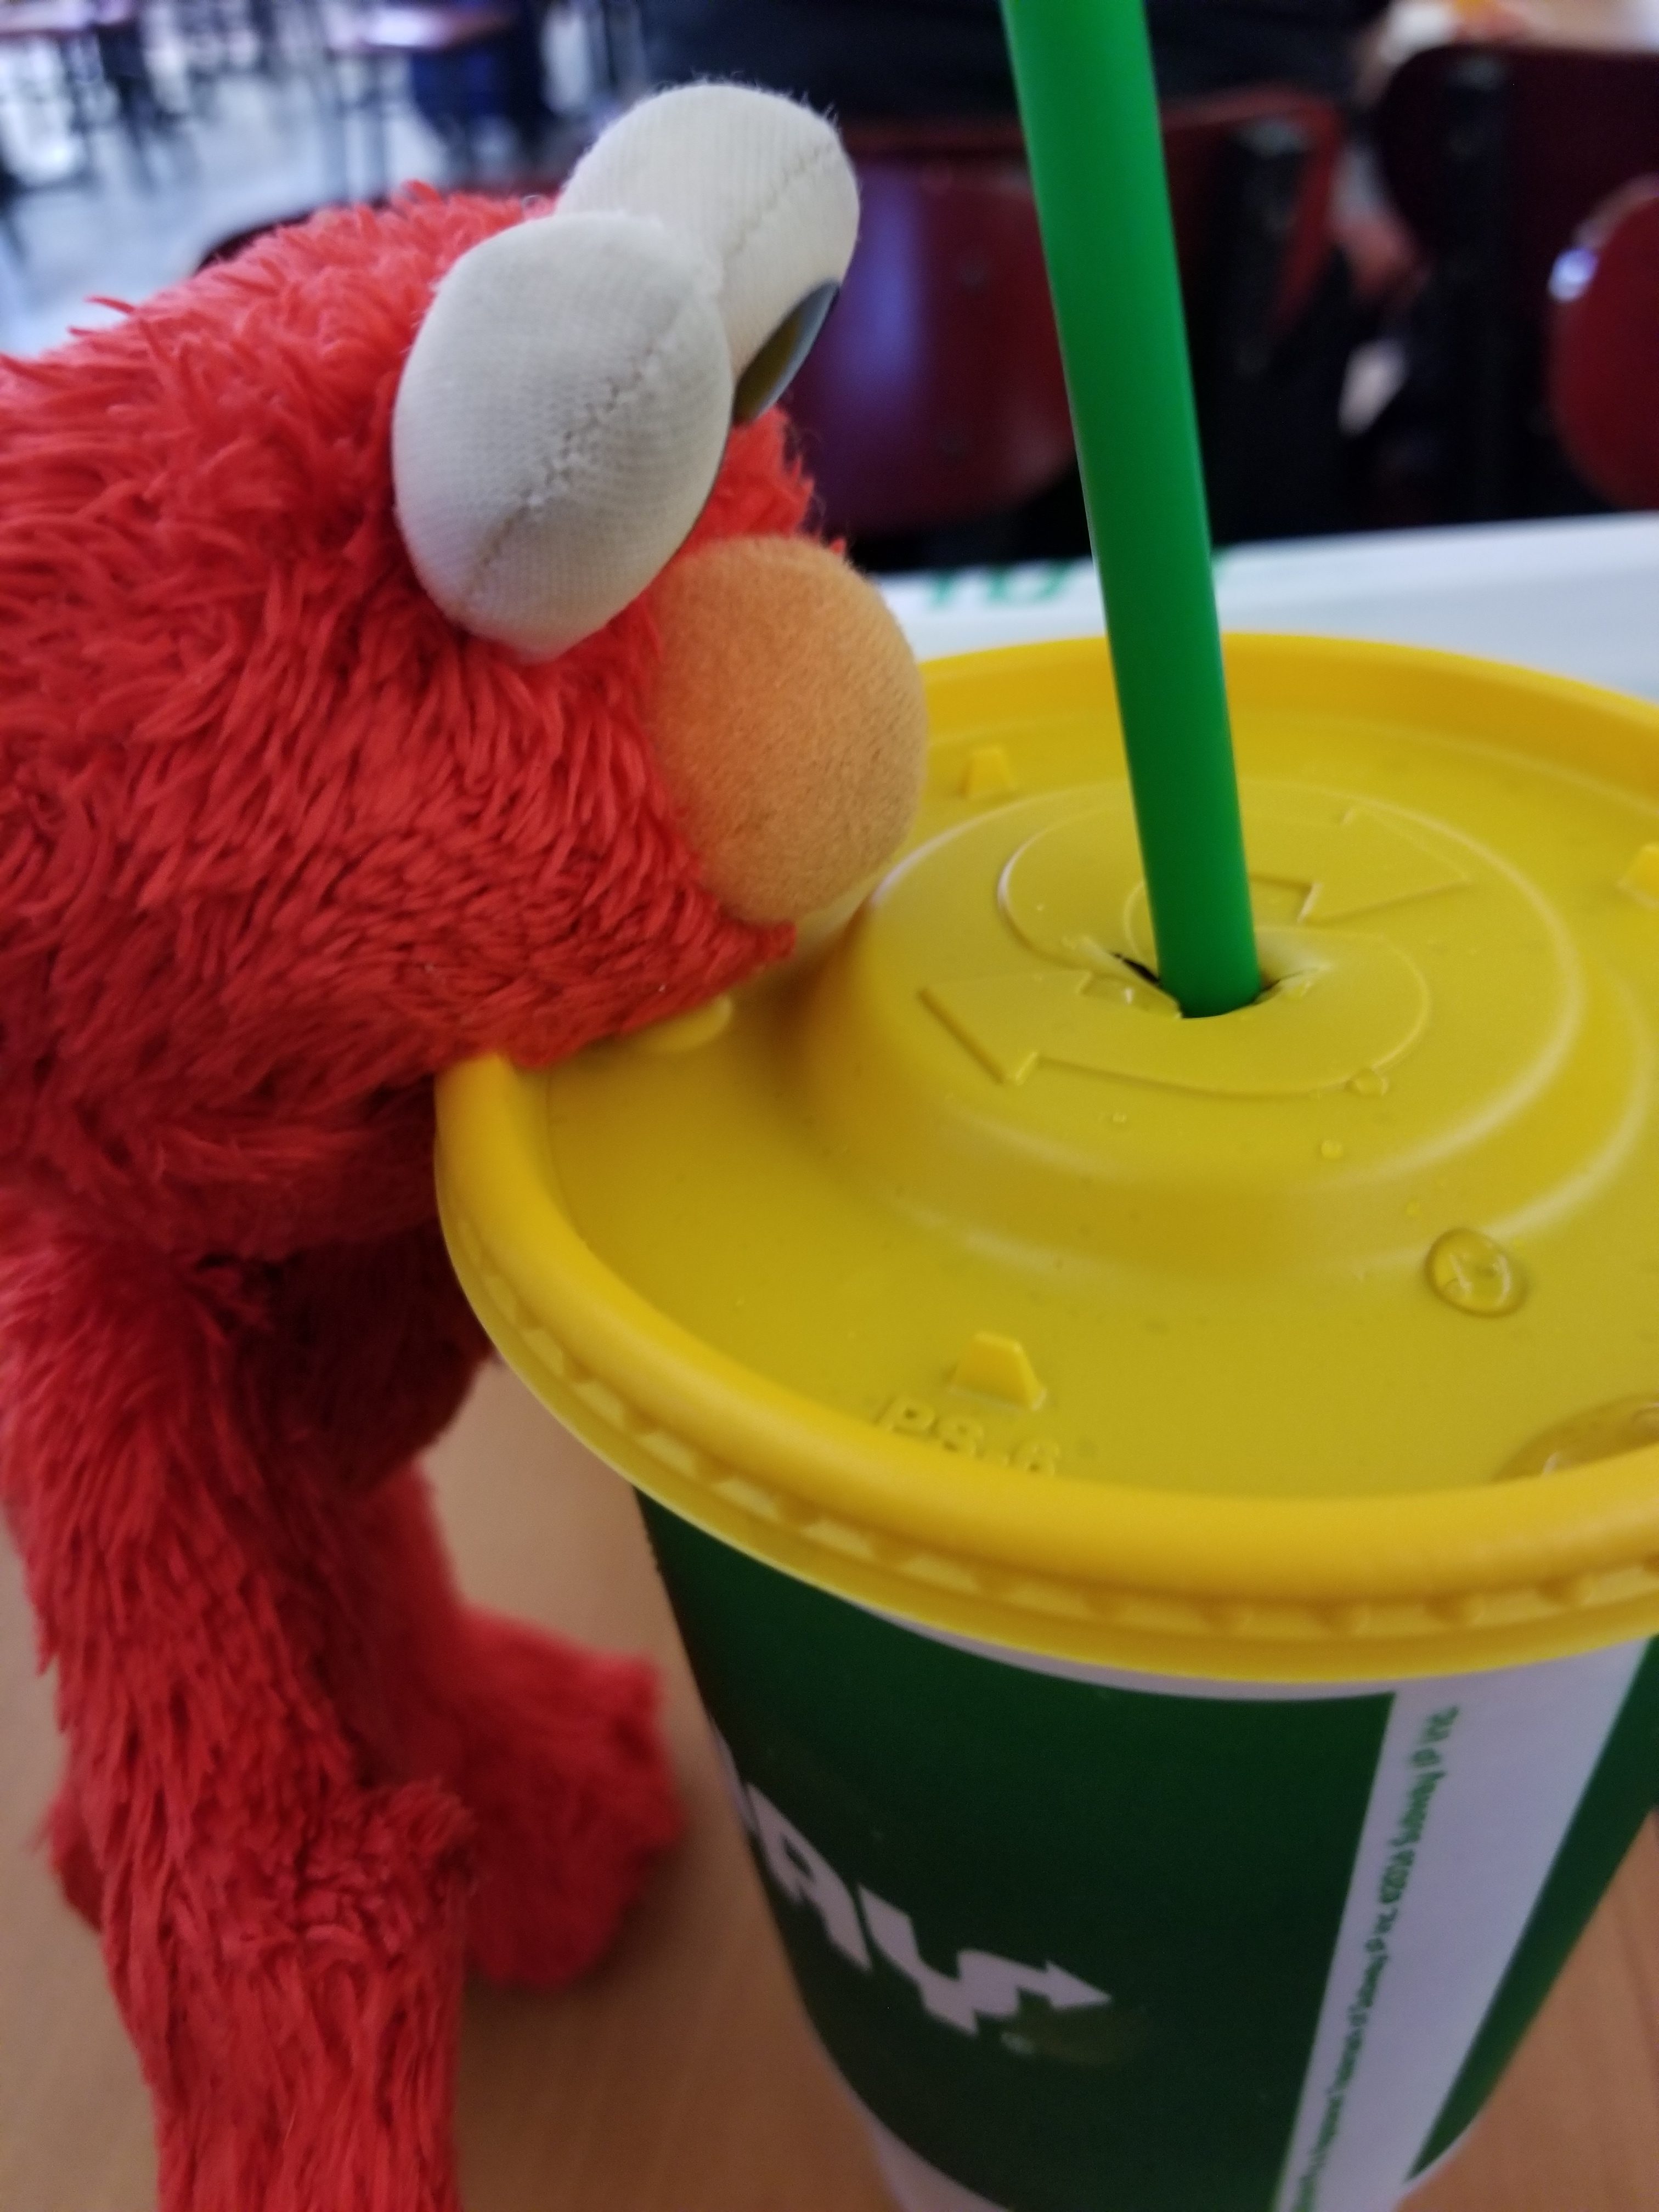 Elmo is so hungry he tries to eat the drink! Silly Elmo.